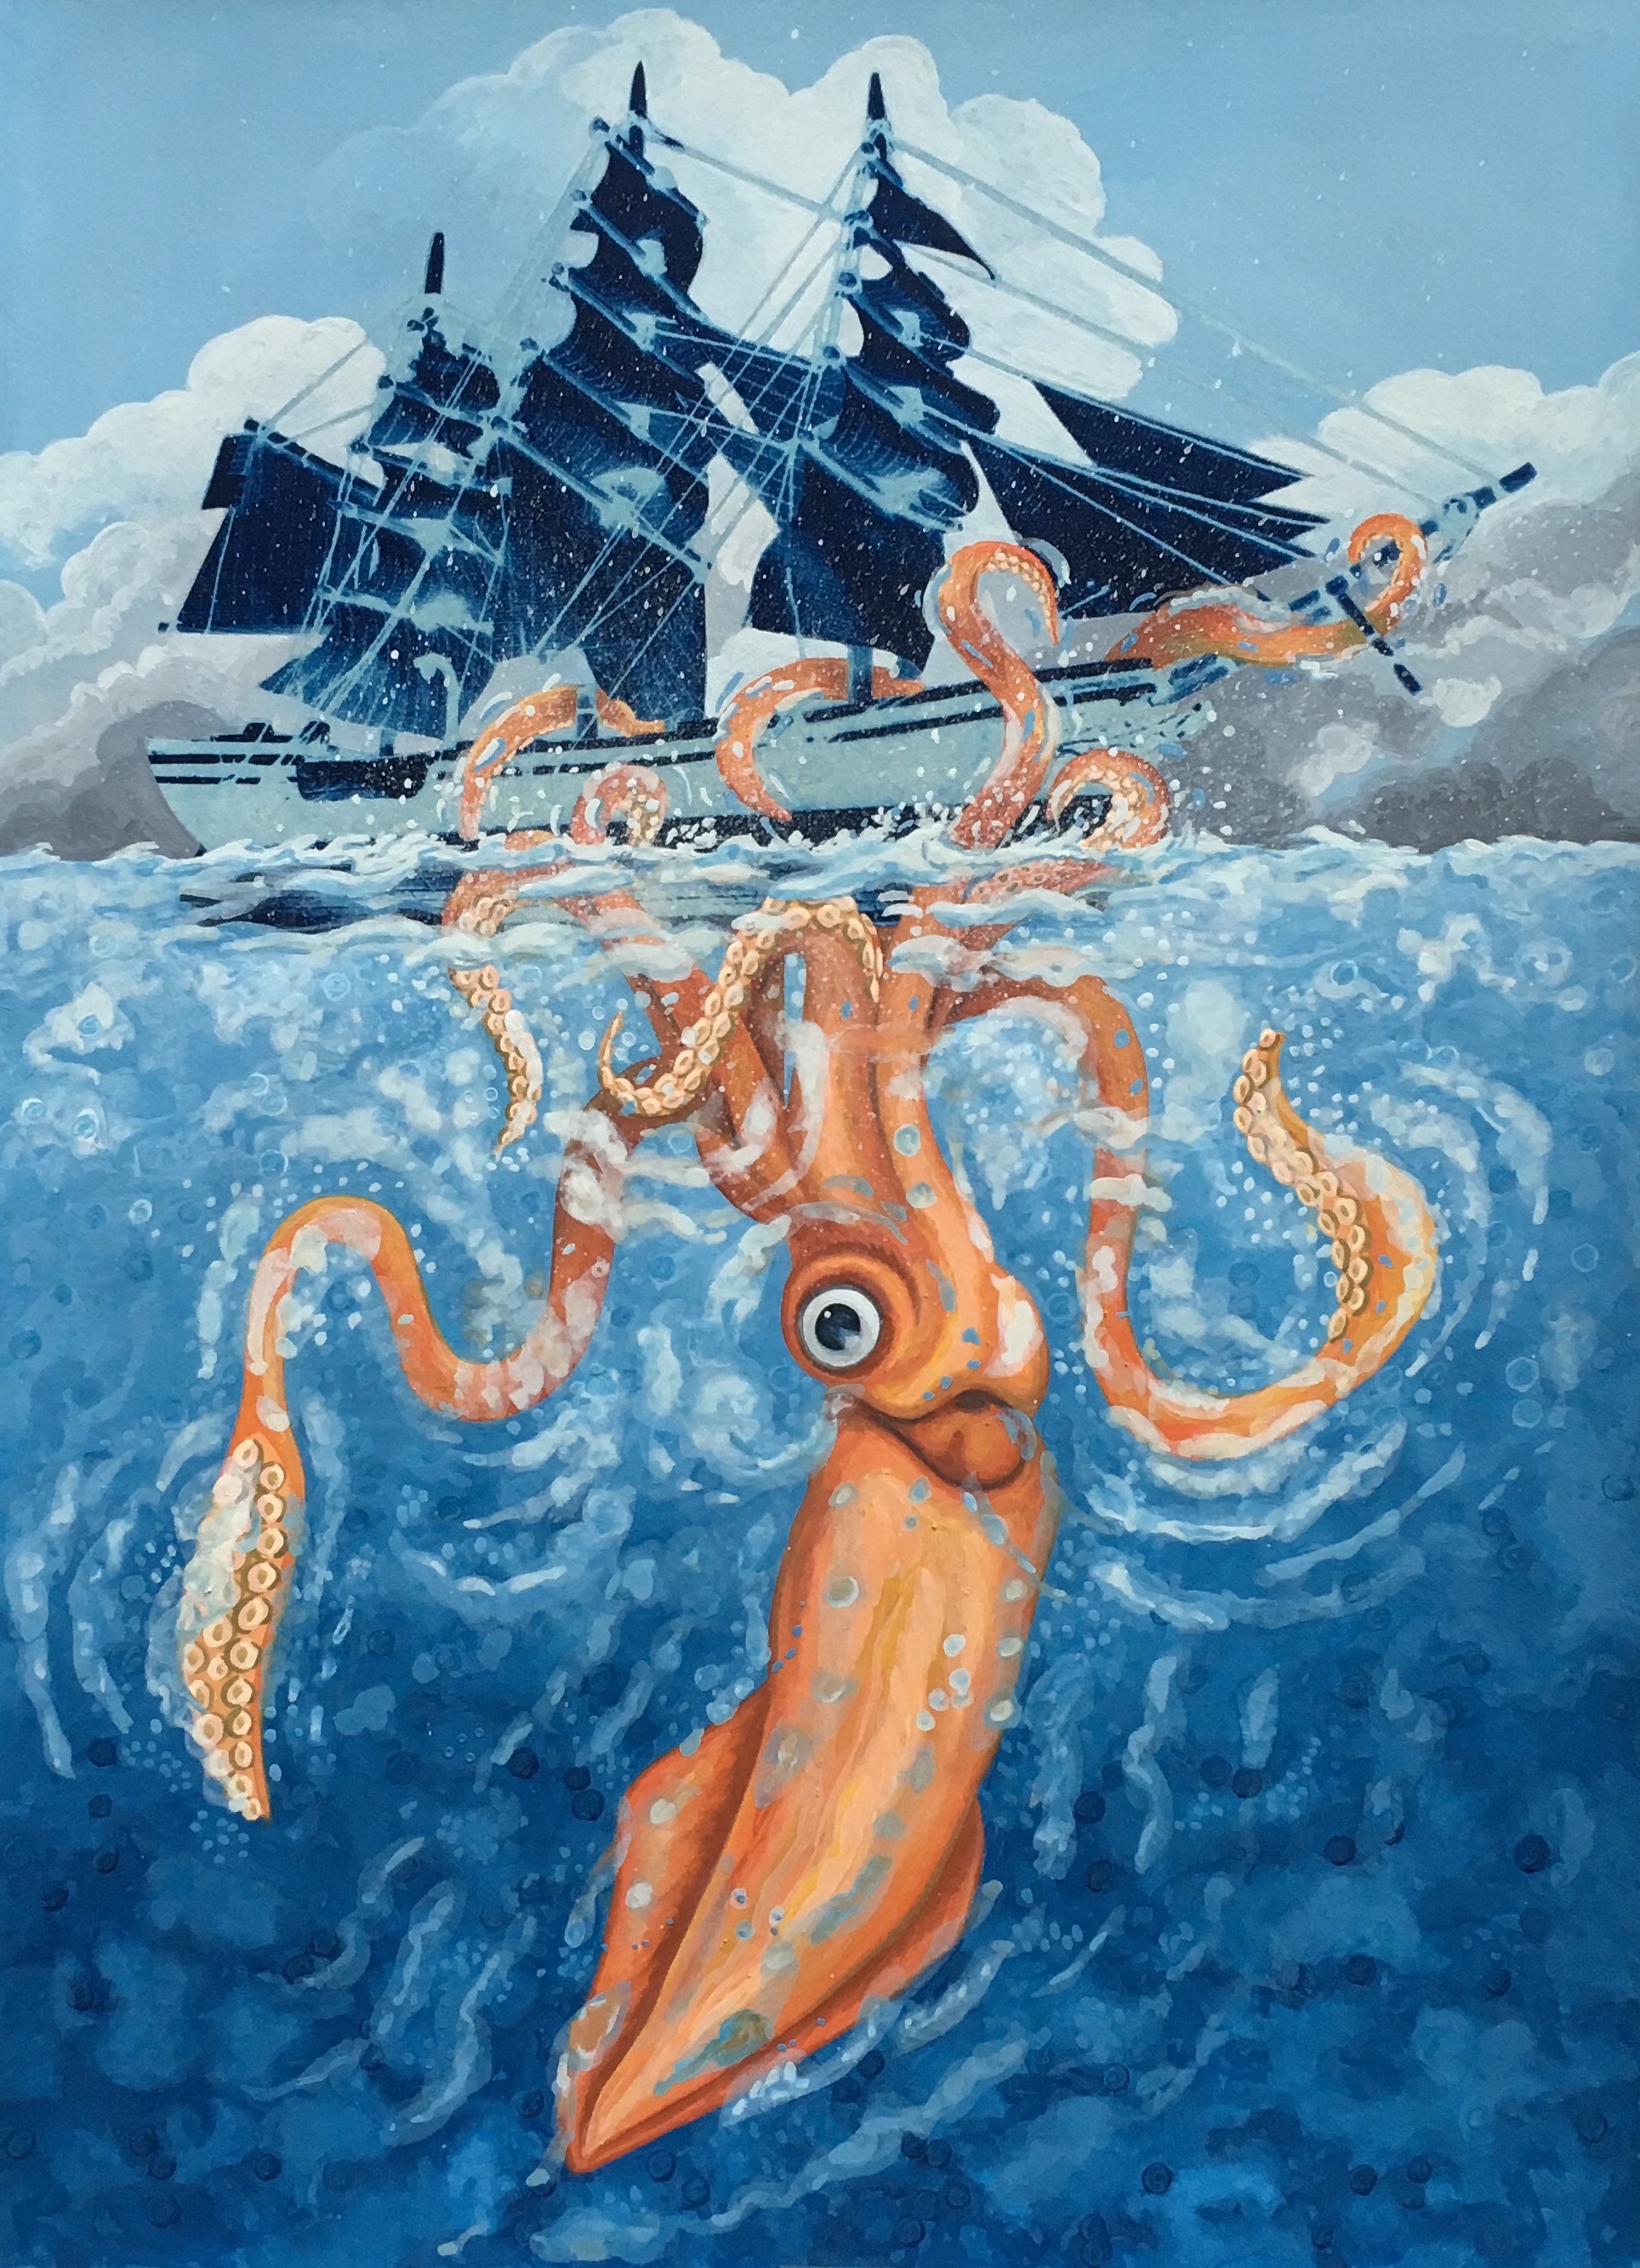 4) Squid Attack. 2016, 40.5 x 29.7 cm, cyanotype print and gouache on paper.